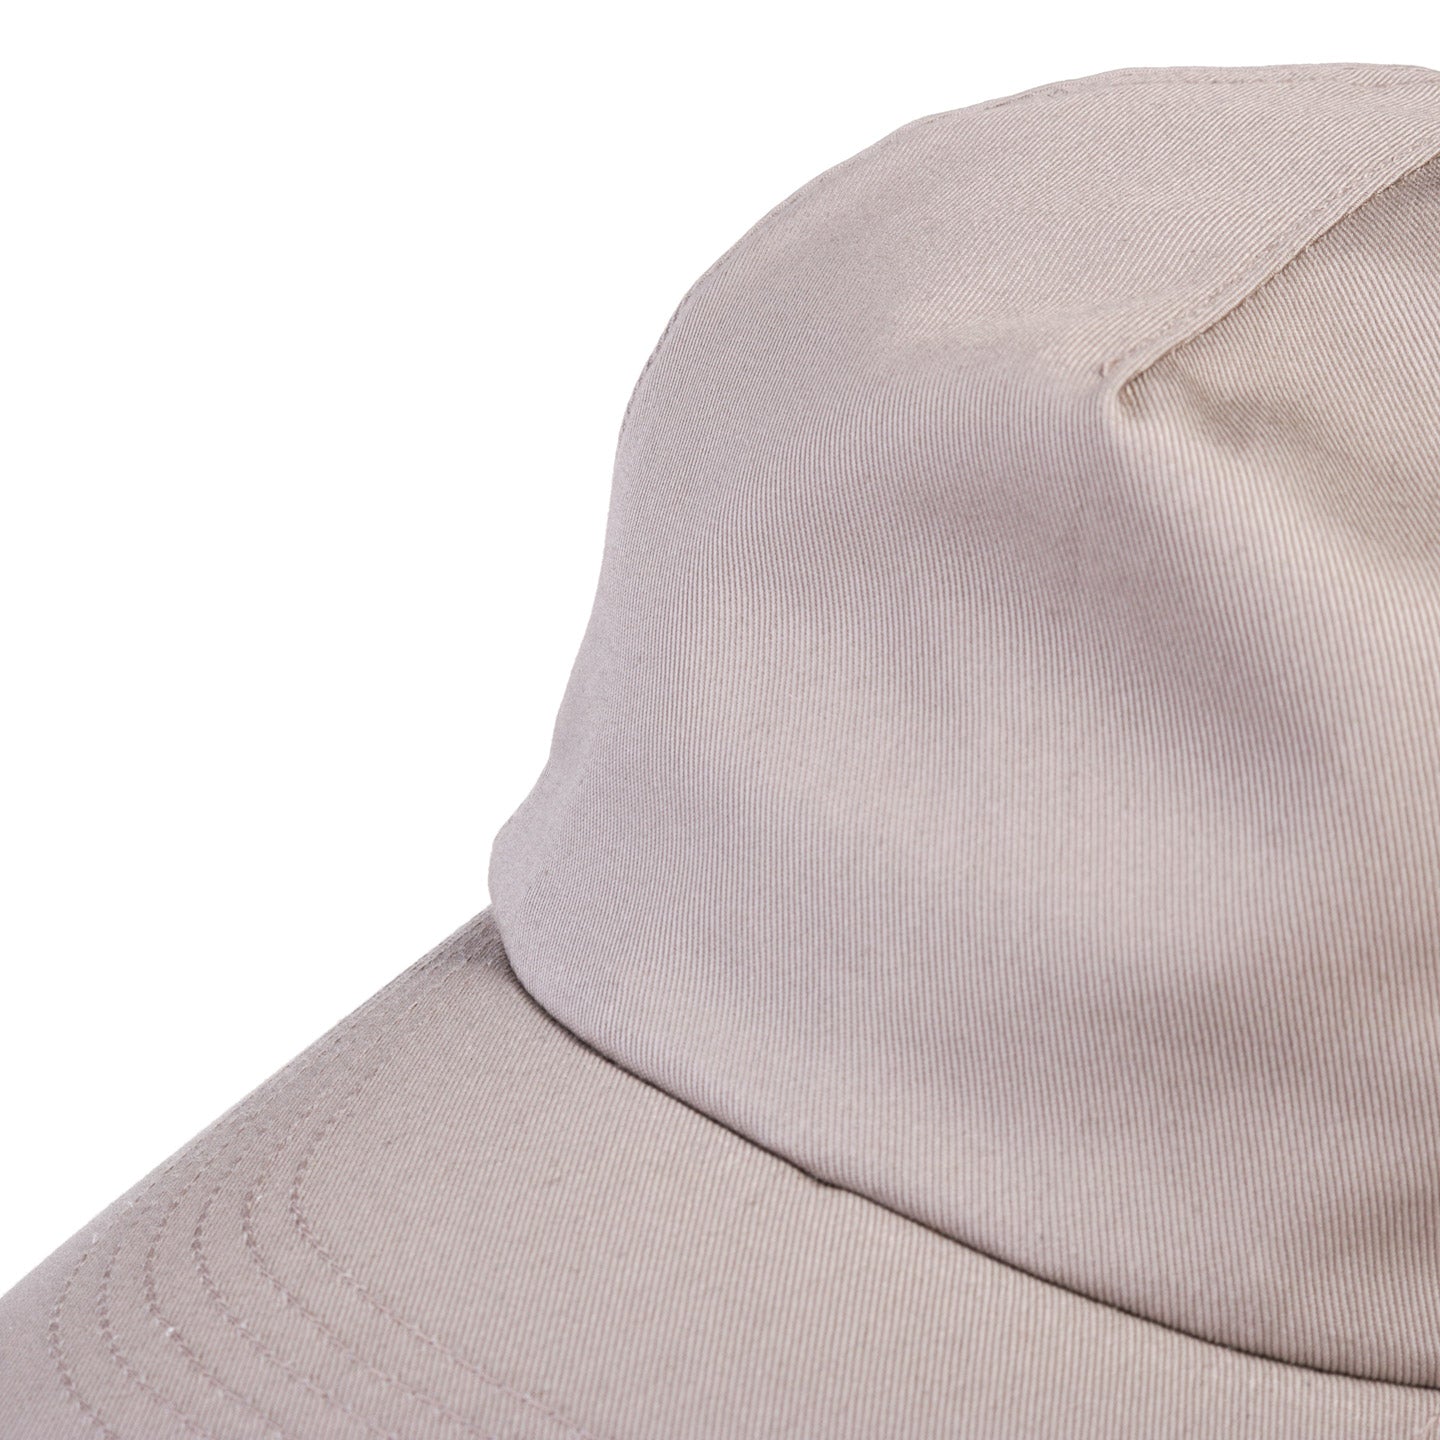 LADY WHITE CO. COTTON TWILL CAP TAUPE